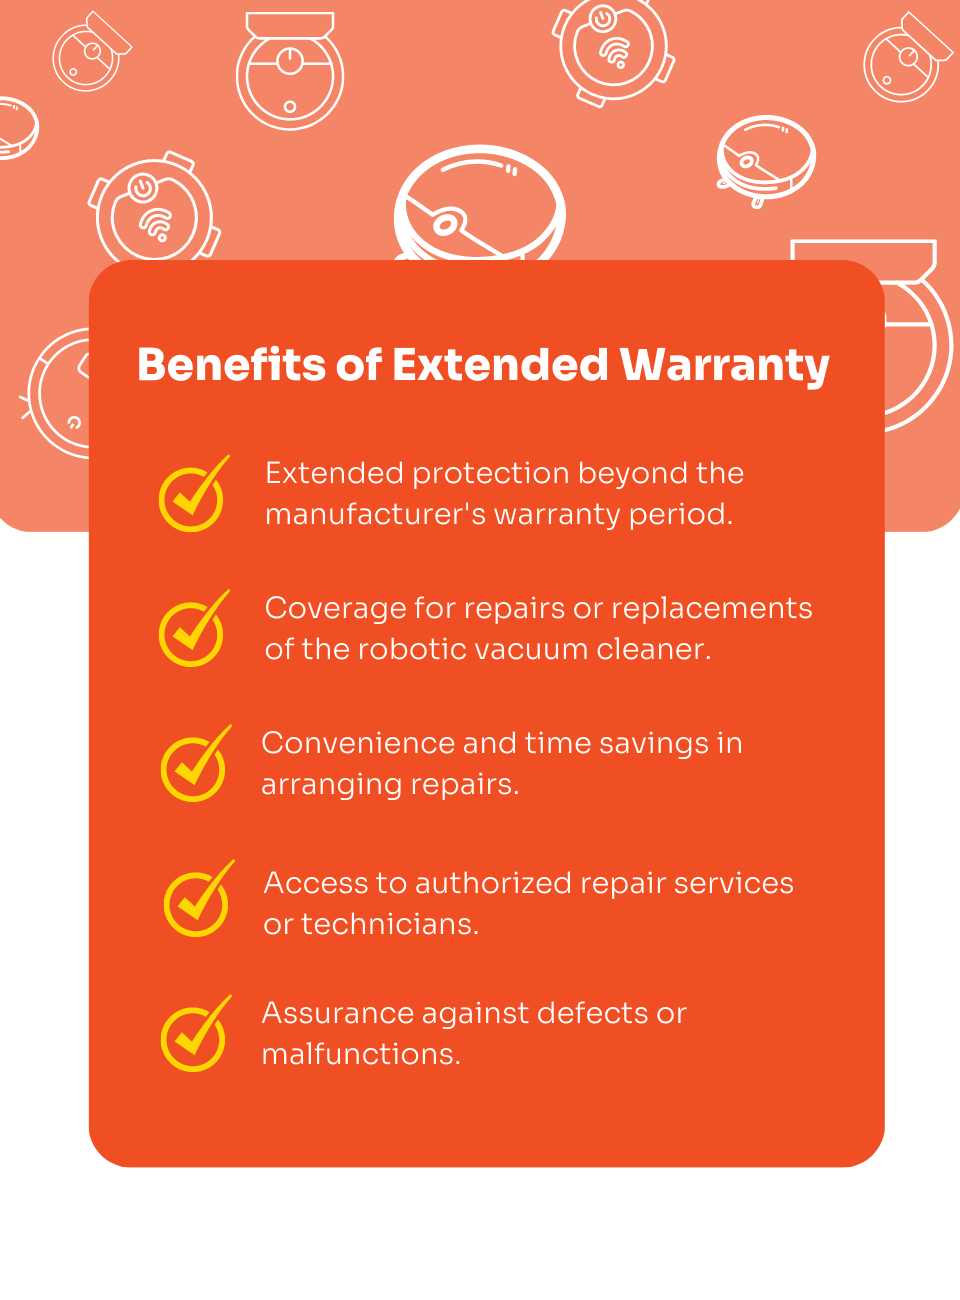 ILIFE 1 year extended warranty image 3